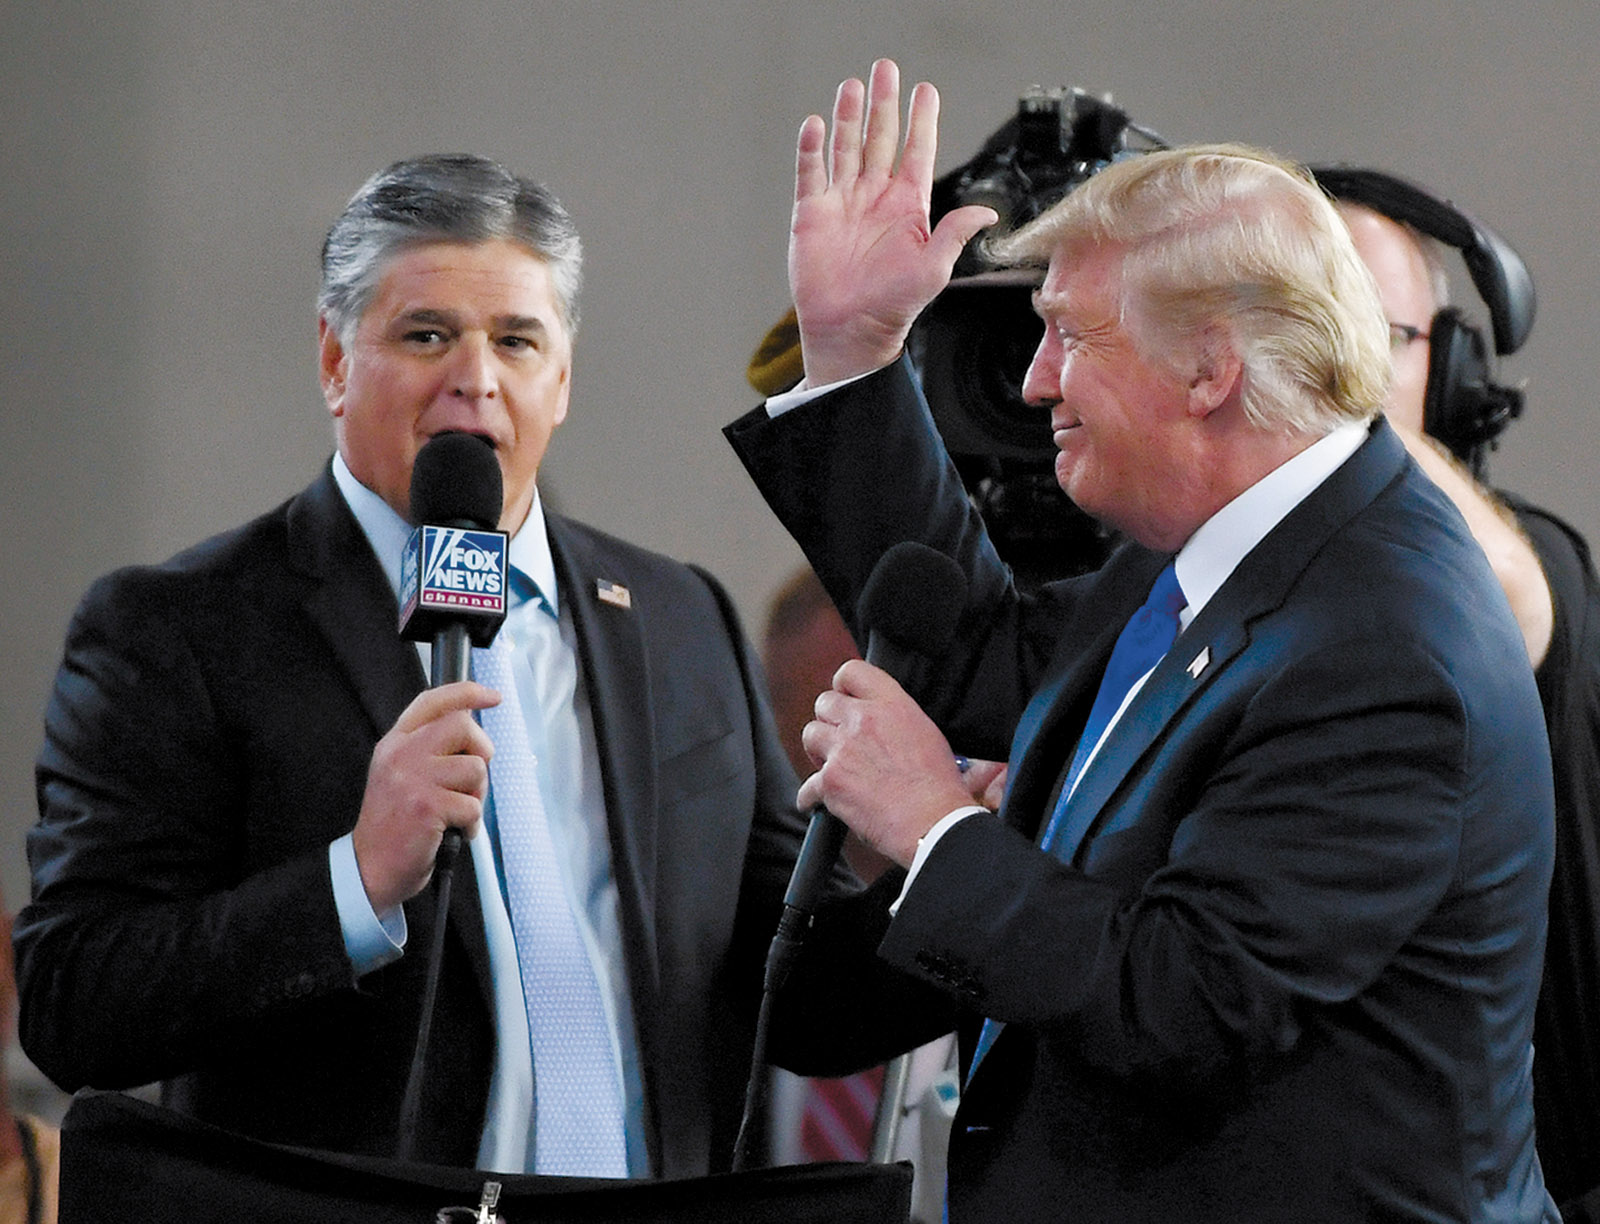 Sean Hannity interviewing President Trump before a rally in Las Vegas, September 2018